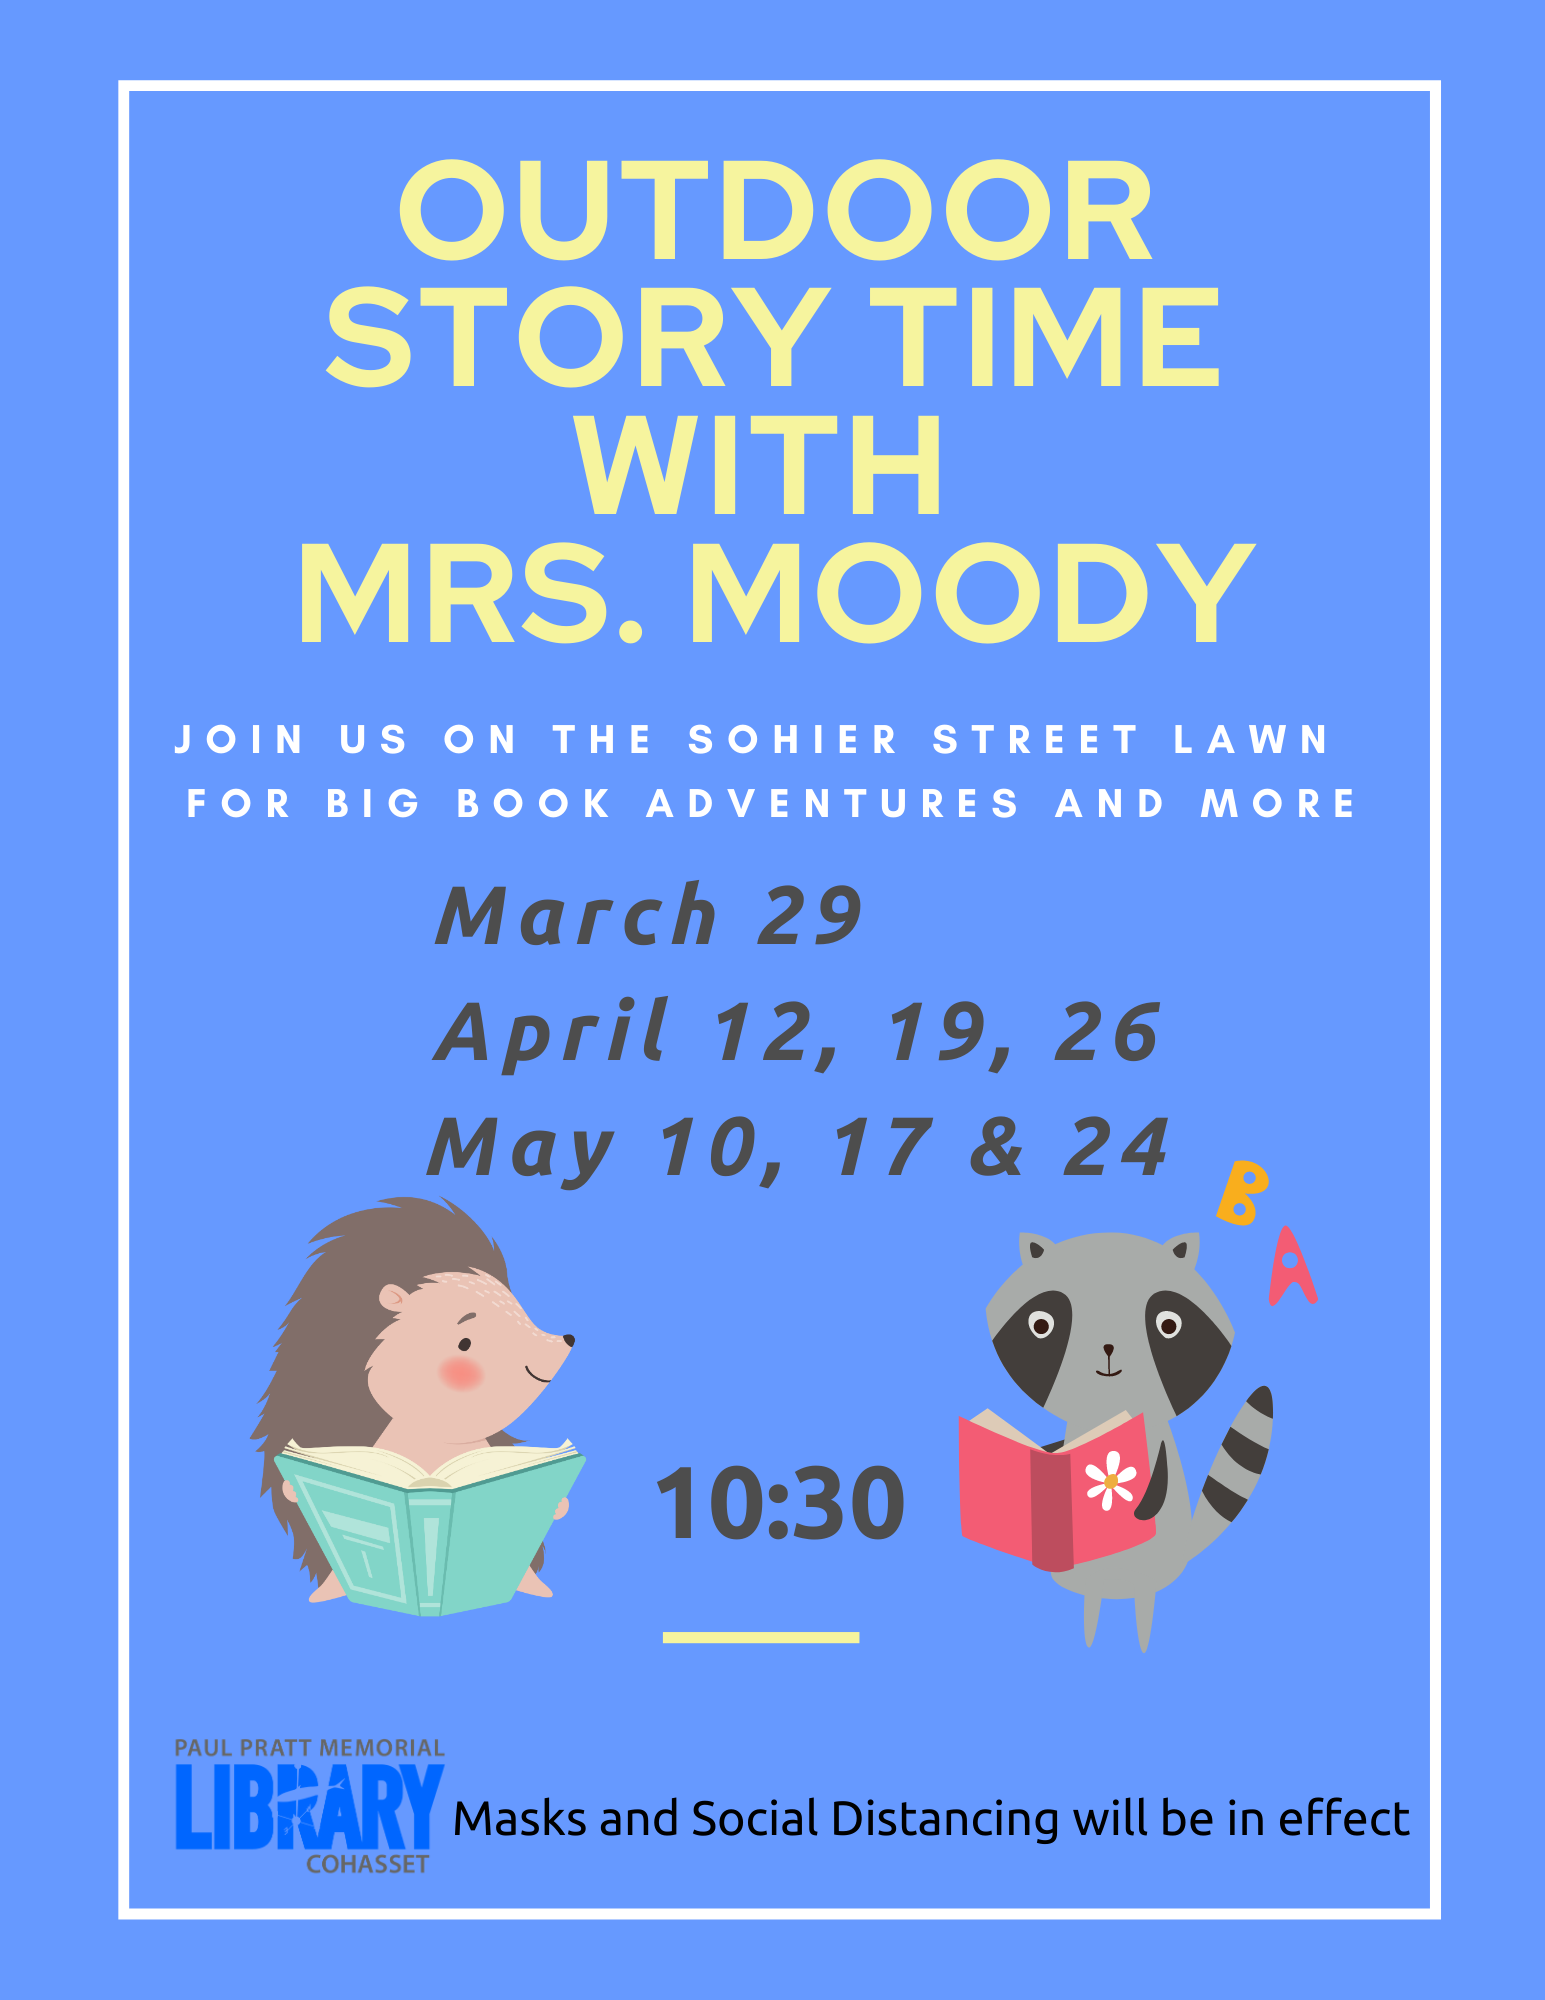 Outdoor storytime with Mrs. Moody on the Sohier St. lawn